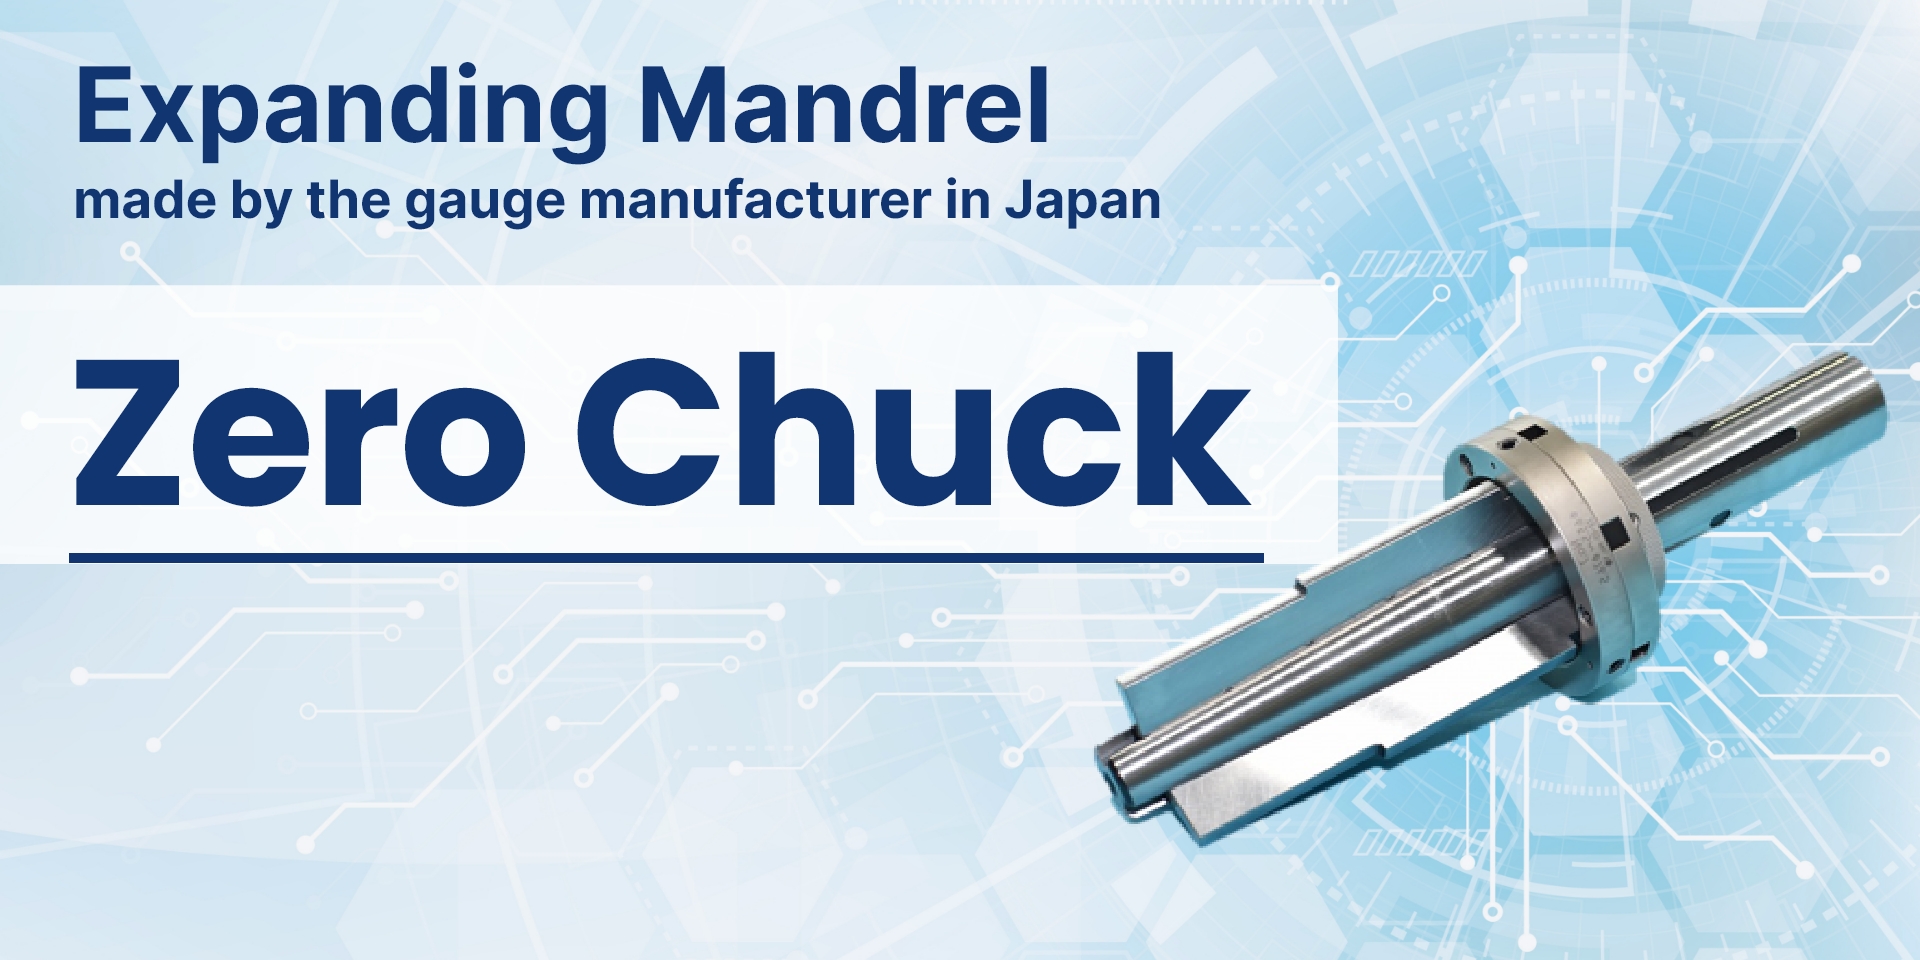 Expanding Mandrel made by the gauge manufacturer in Japan Zero Chuck